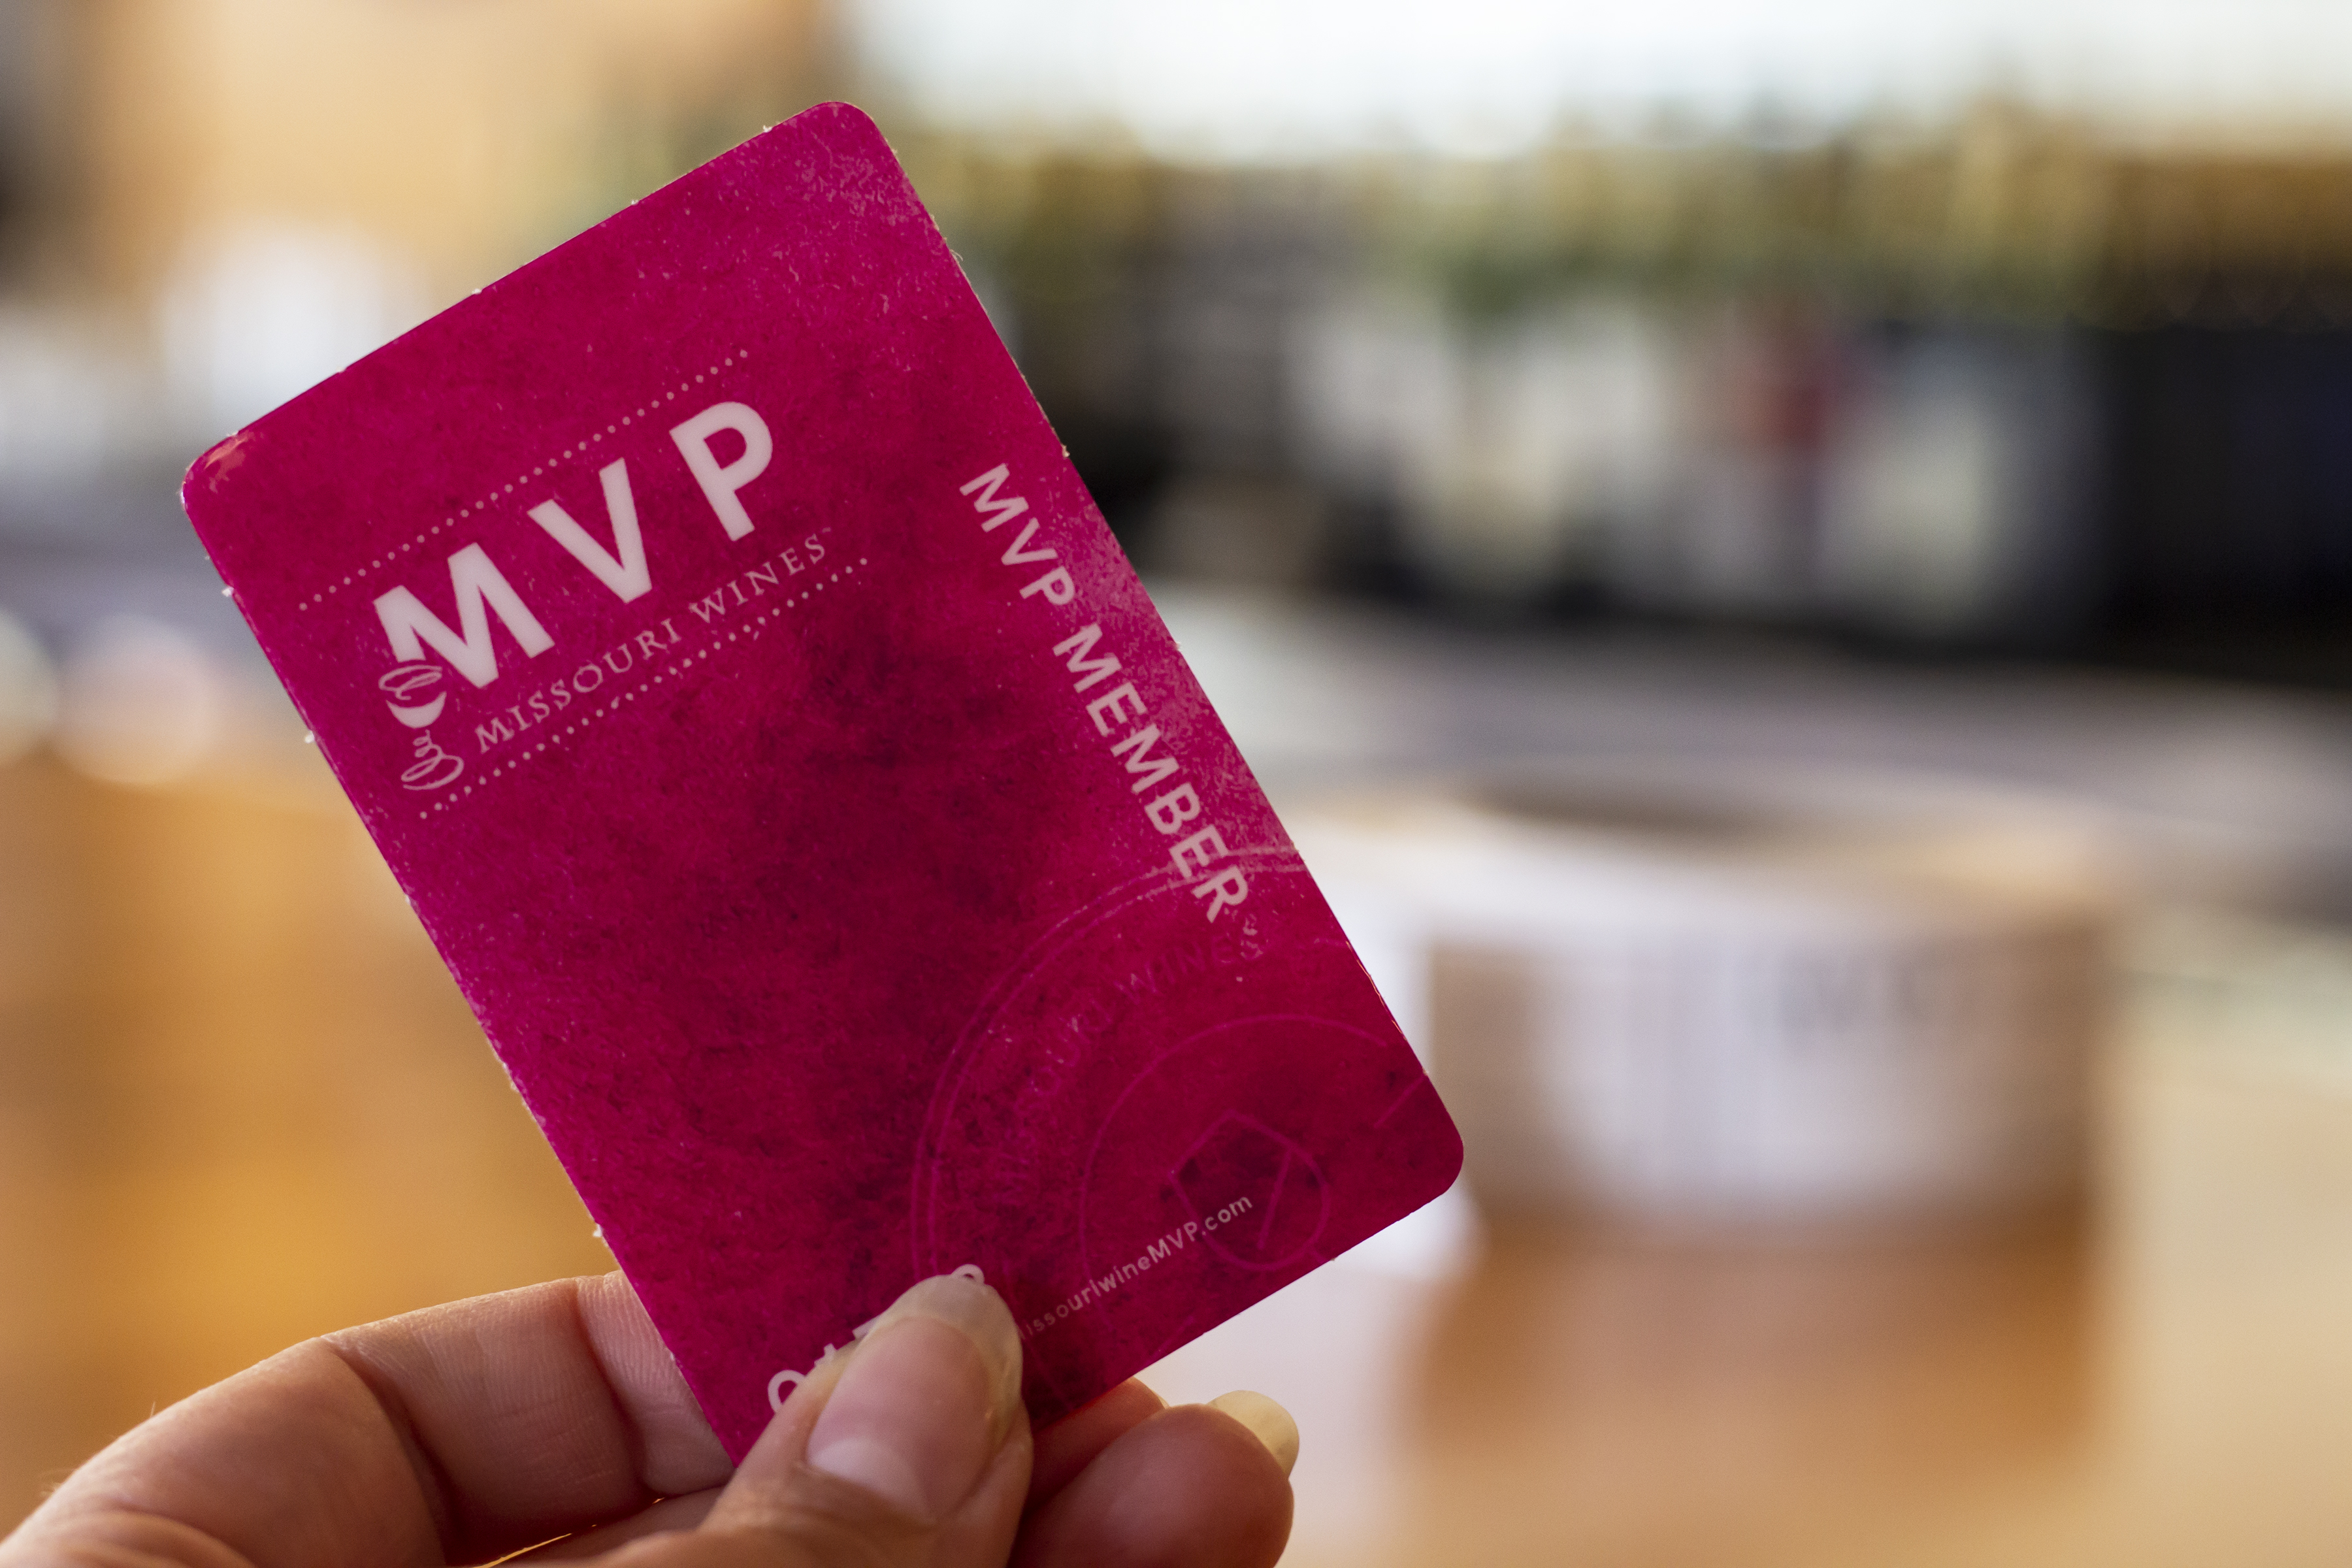 Missouri Winery Visitors Program: Your Ticket to Great Adventures and Cool Rewards